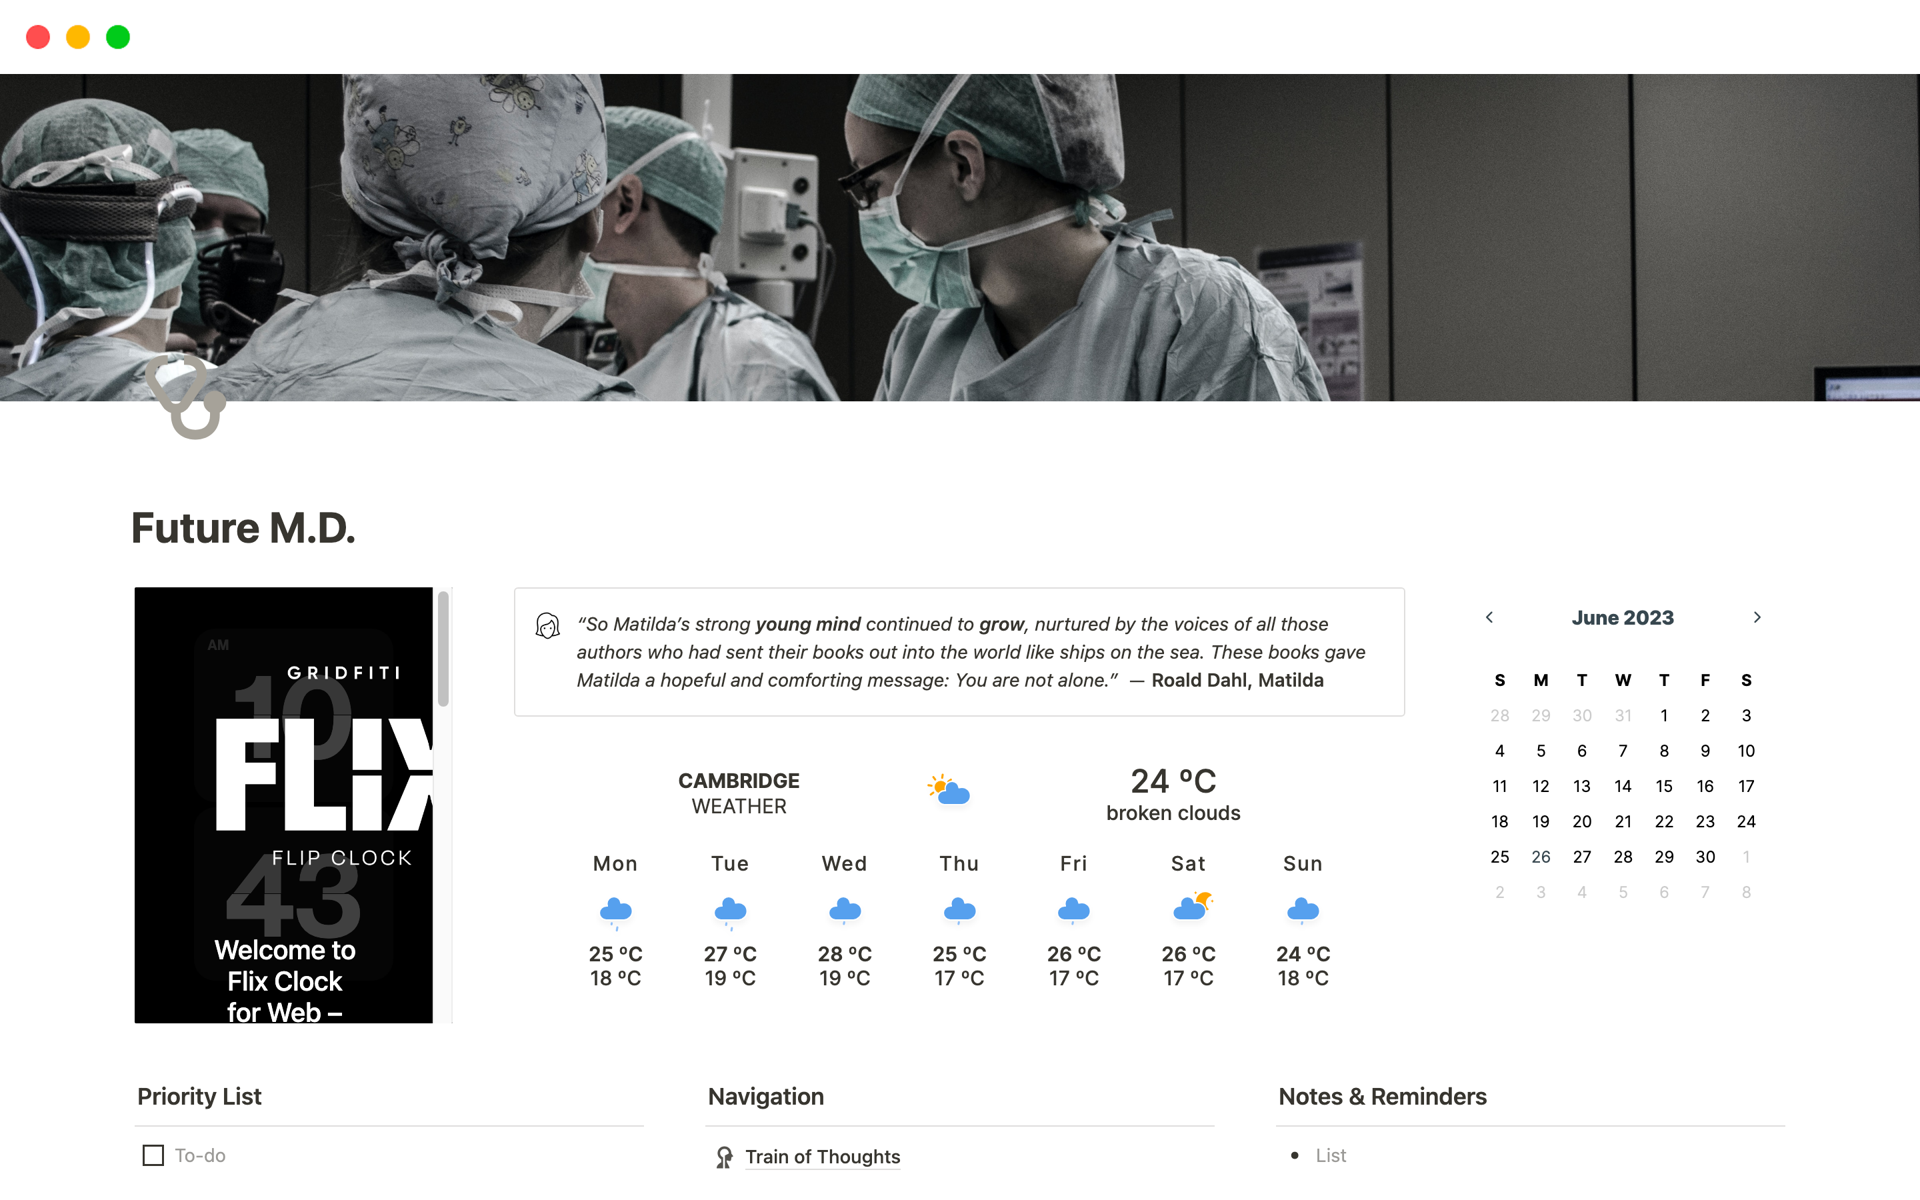 Future M.D. is a productivity dashboard designed for aspiring medical students that features a clock, weather forecast, calendar, priority list, academic links, navigation tools, school diary, notebooks, finances, work schedule, project list, and time-blocking schedule.